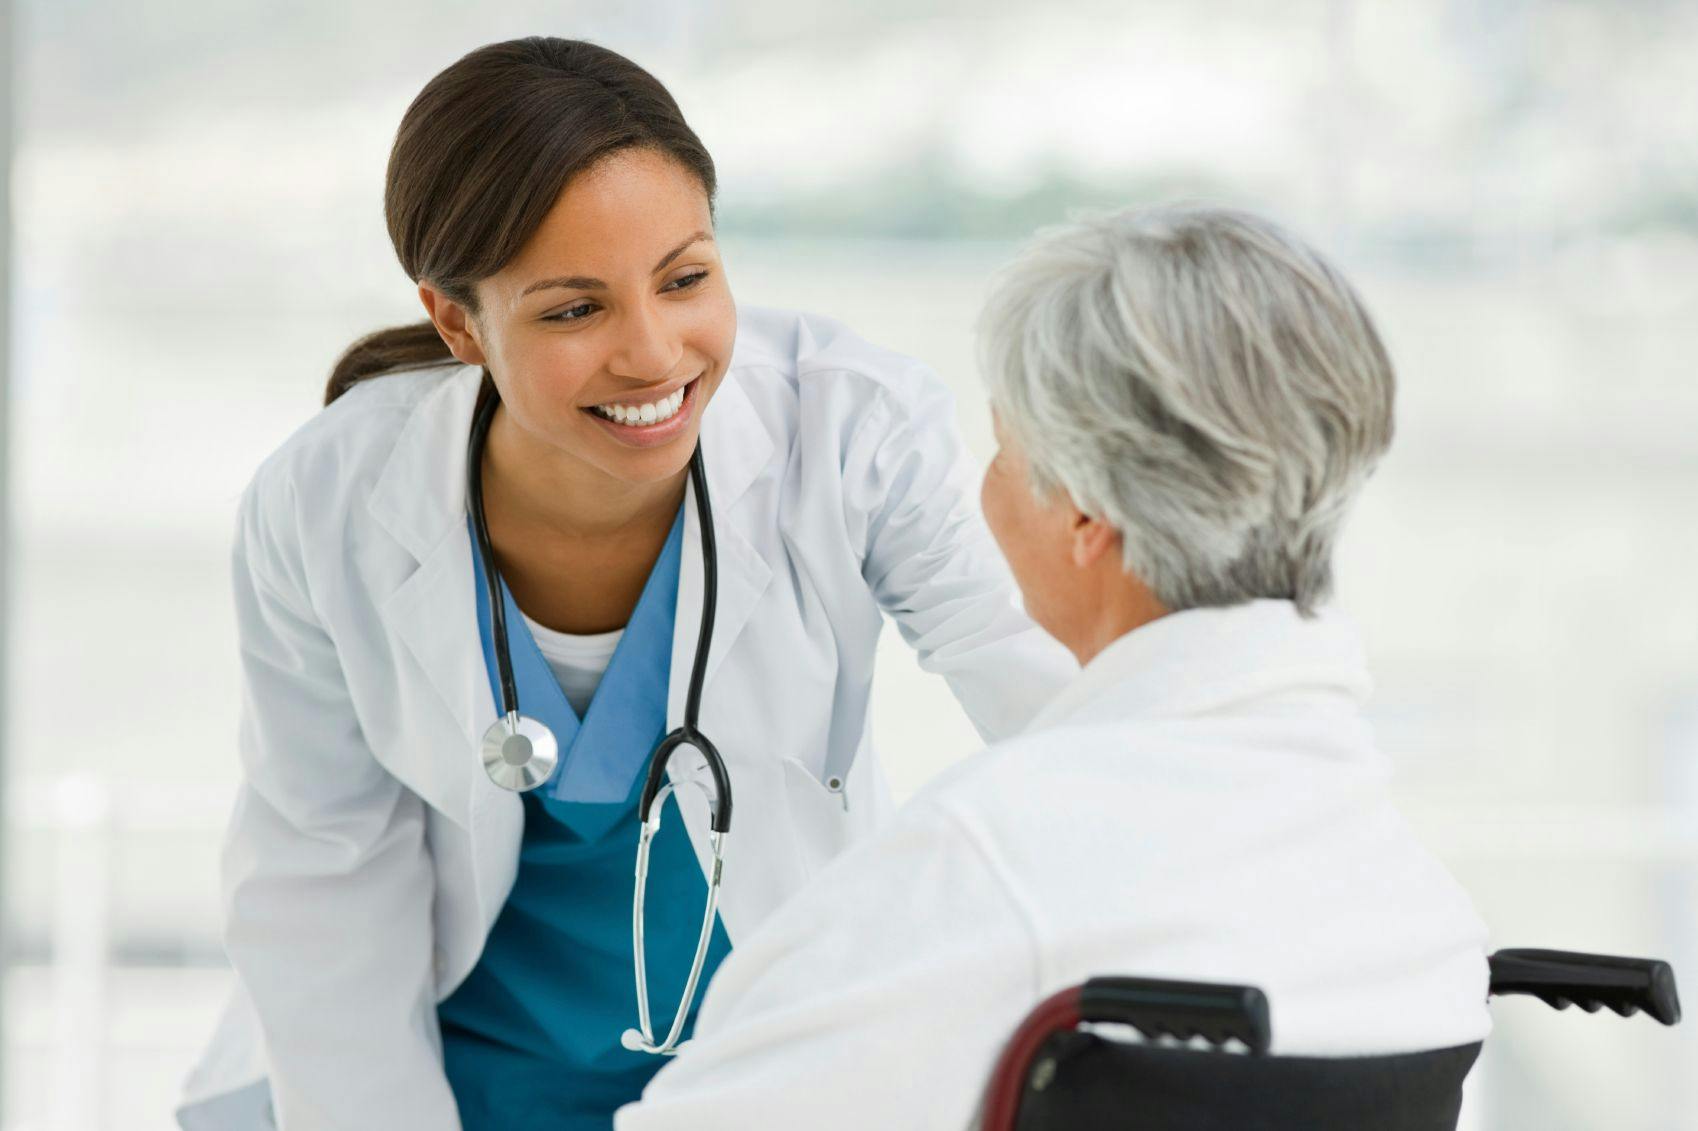 Physician talking to patient